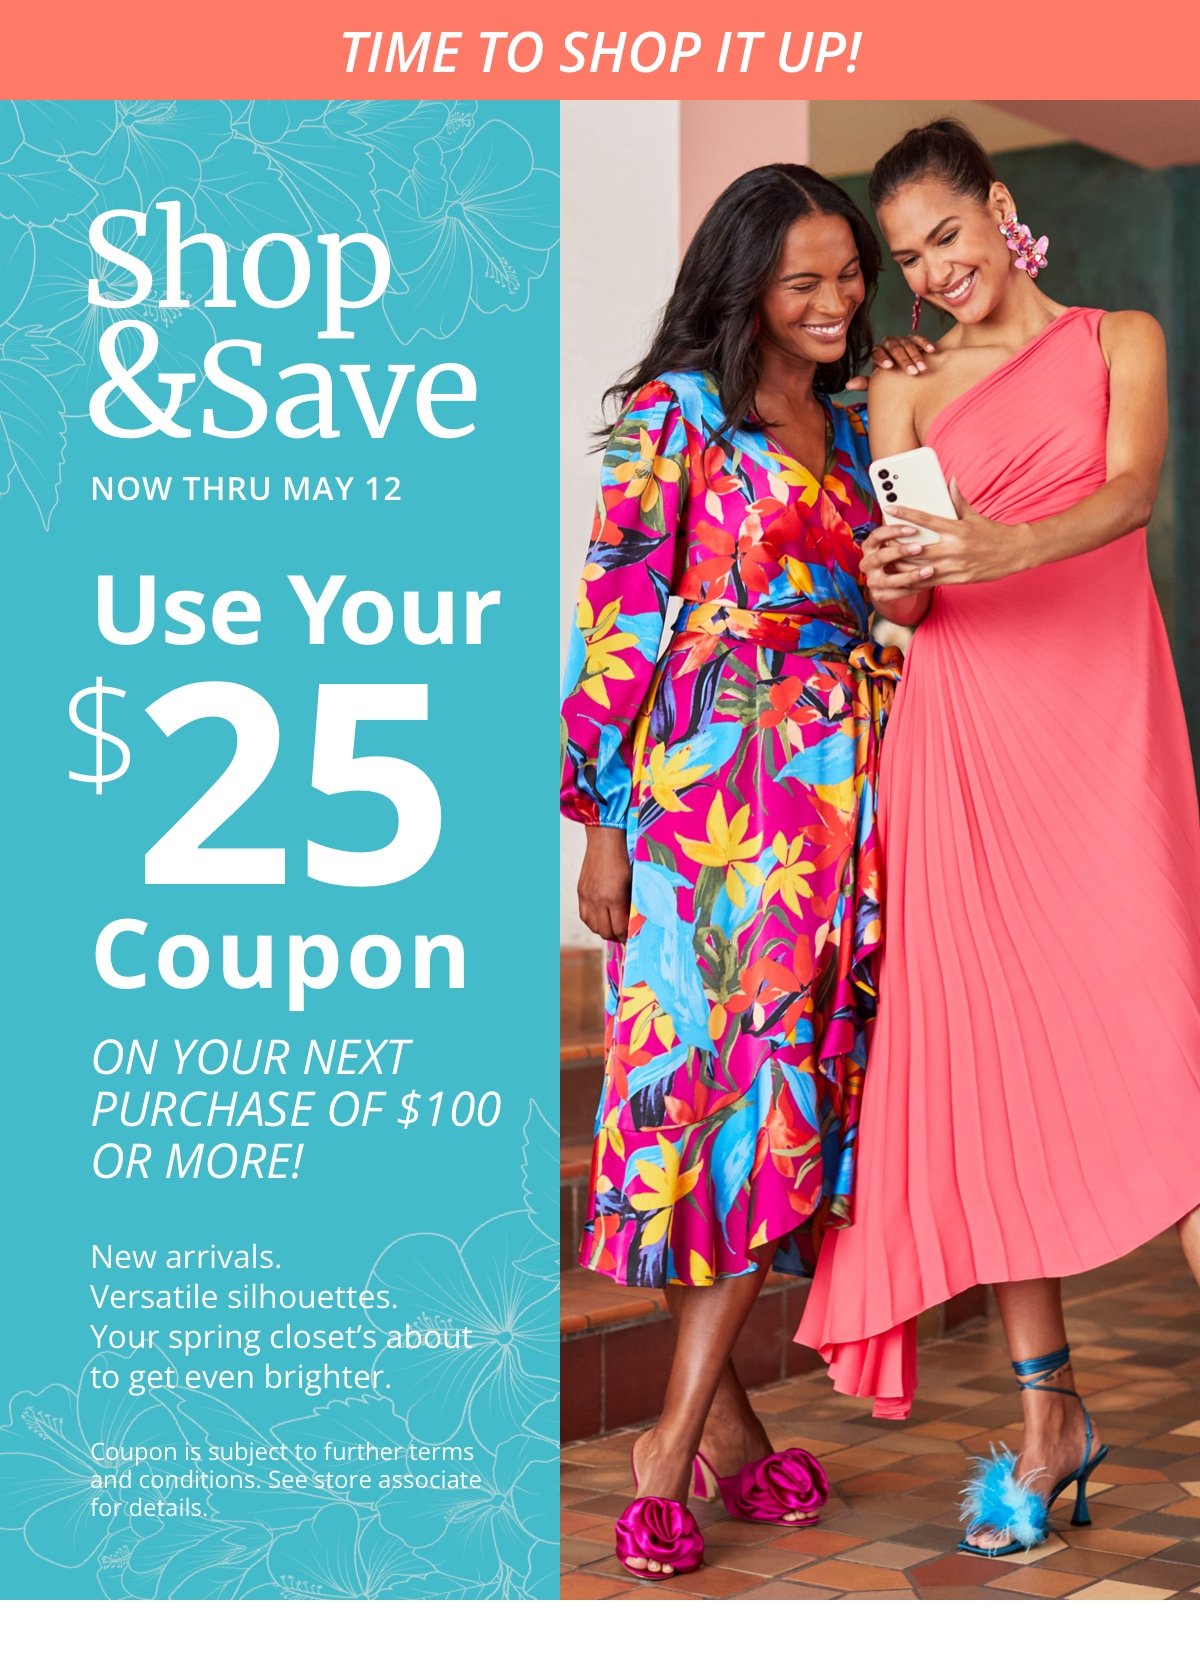 Time to Shop It Up!|Shop and Save|Now Thru May 12|Use Your |\\$25 Coupon|On your next purchase of \\$100 or more!|New arrivals. Versatile silhouettes. Your spring closet’s about to get even brighter. |Coupon is subject for further terms and conditions. See store associate for details.